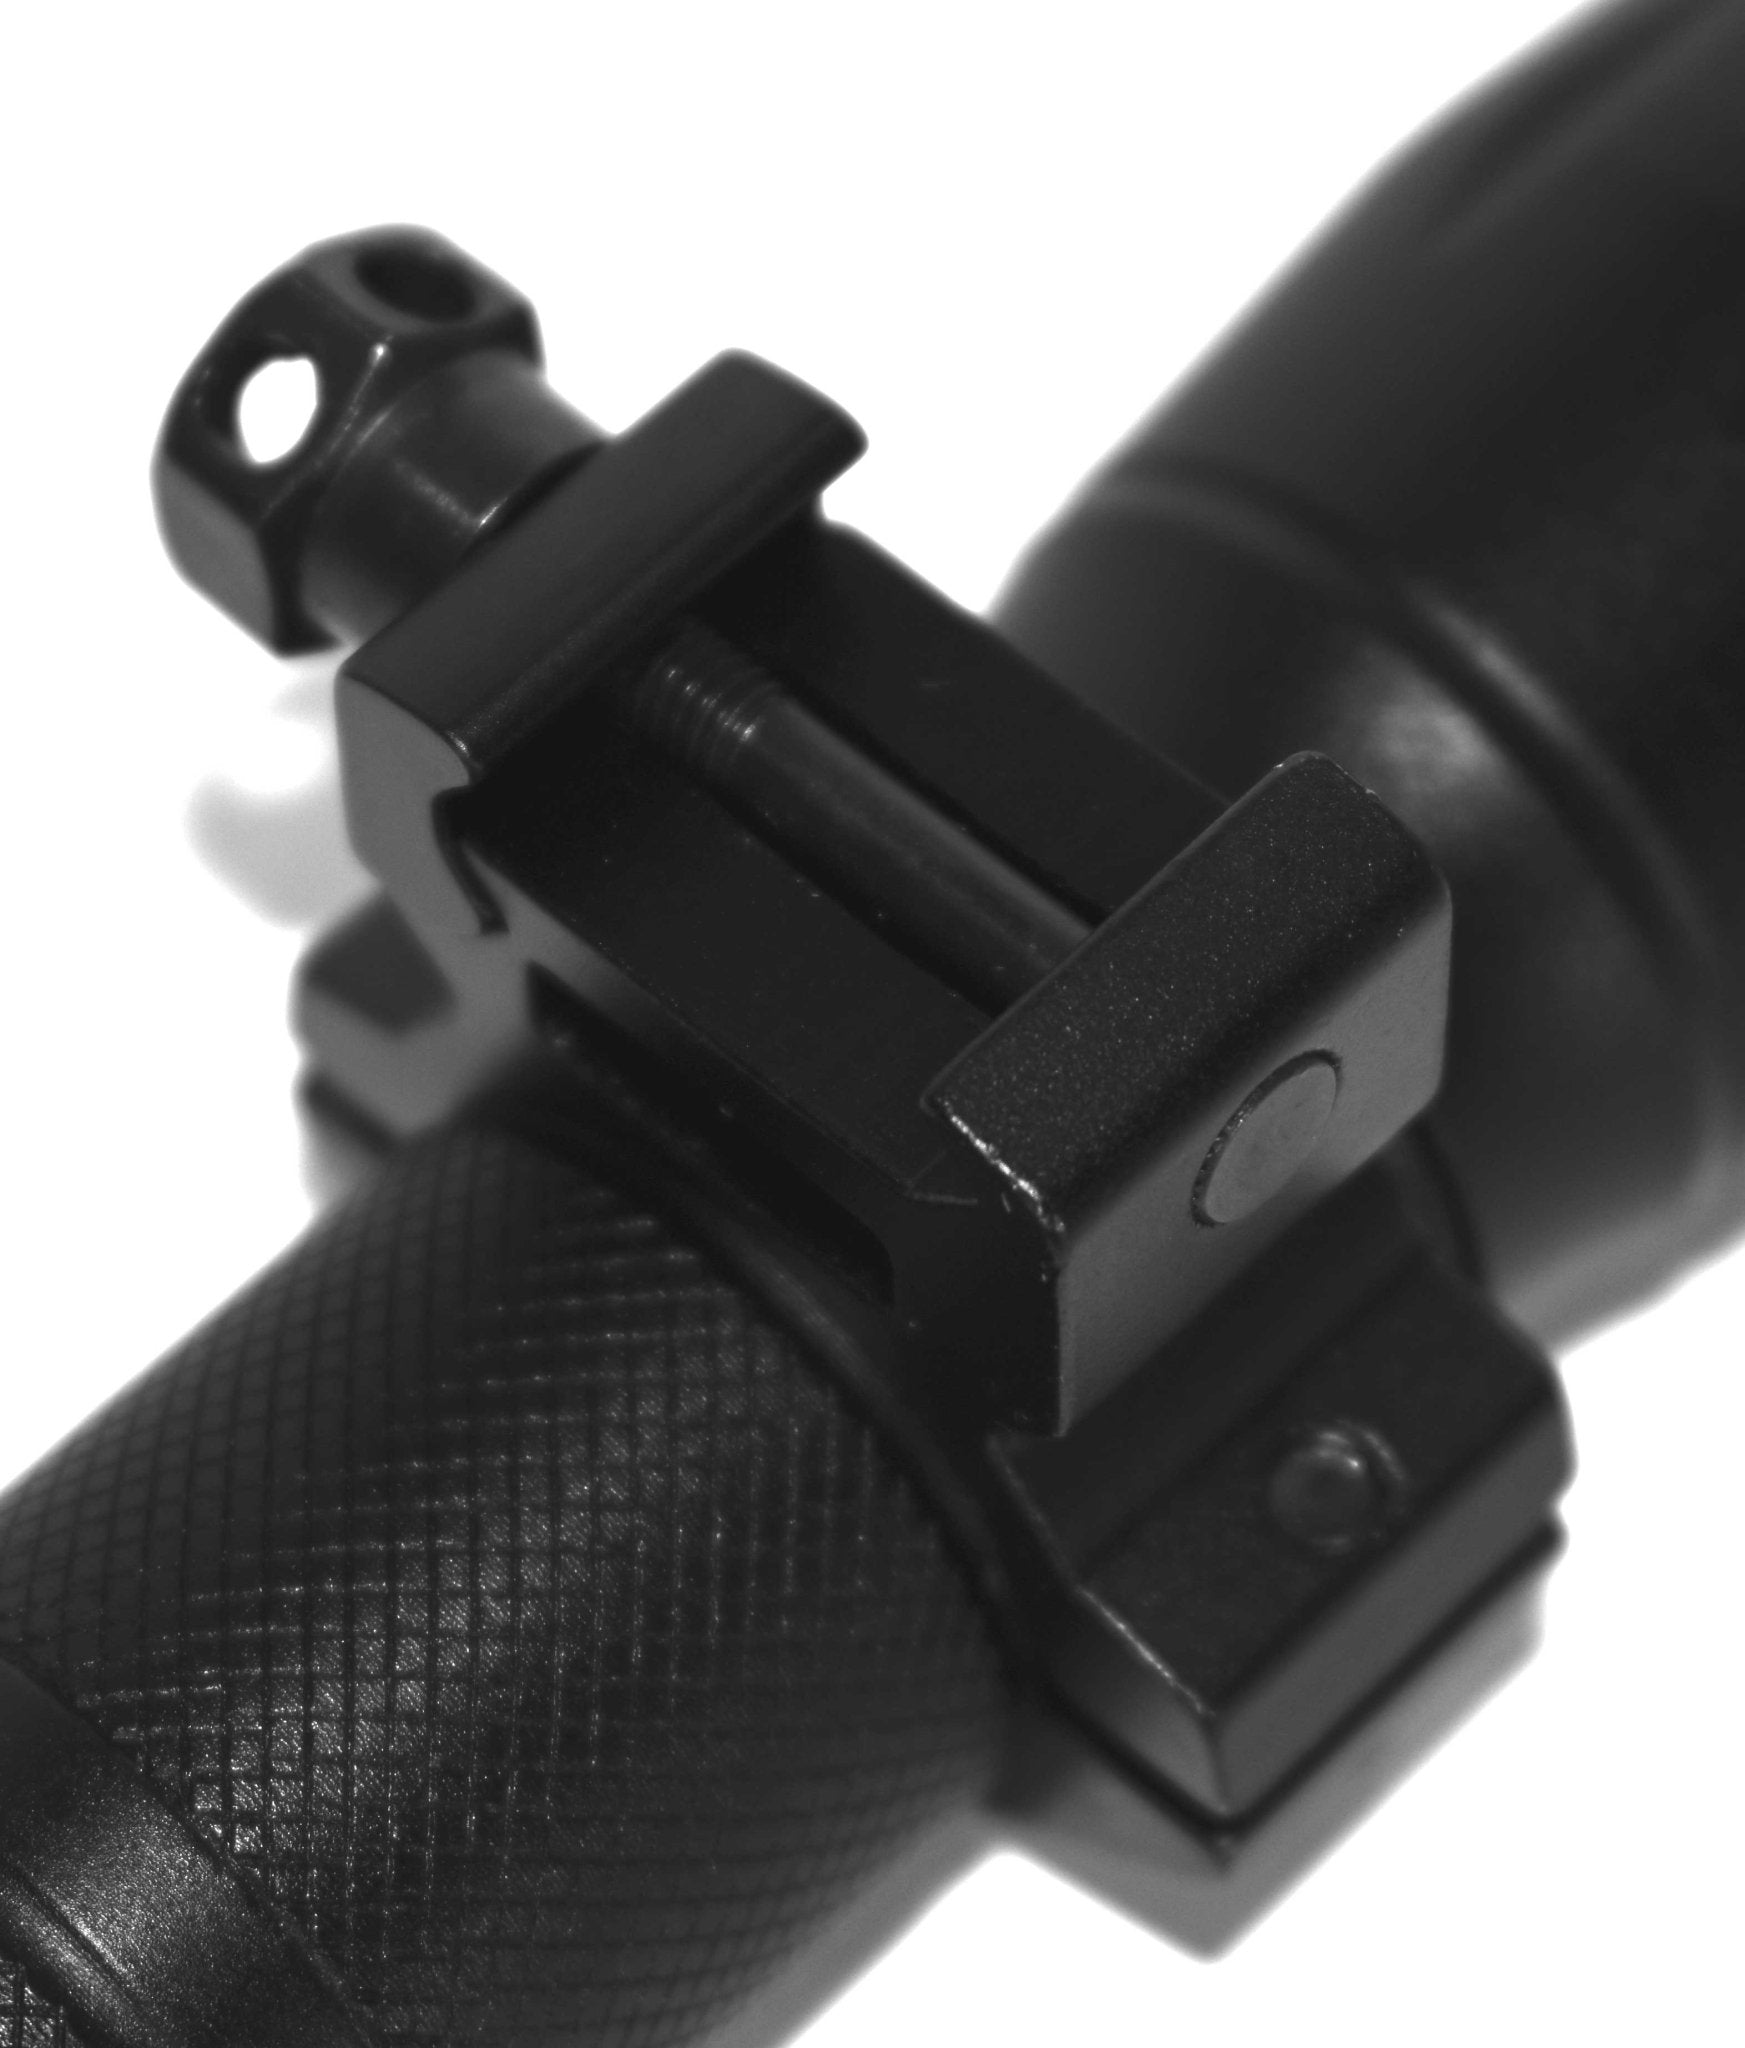 Trinity 1200 Lumen Flashlight With Mount Compatible With Ruger Mini 14 And Ruger Mini 30 Rifle. - TRINITY SUPPLY INC